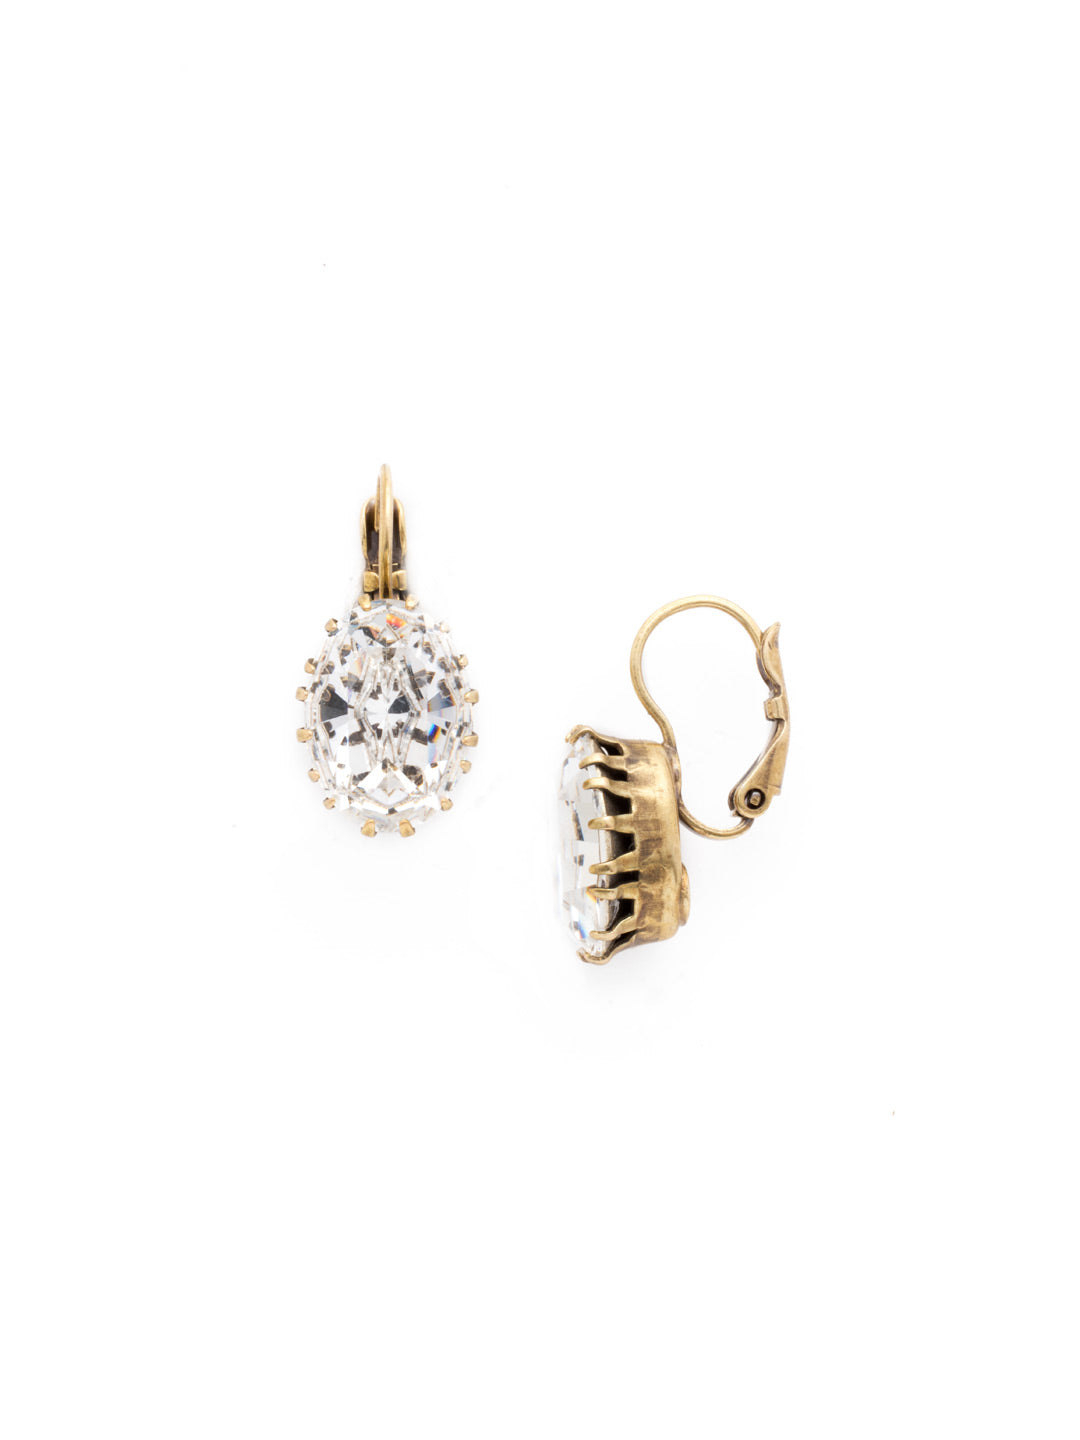 Crown Jewel French Wire Earring - EDH23AGPLU - <p>Our Crown Jewel French Wire Earring is a simple wonder! An oval crystal sits in an intricate bezel for a dignified look. From Sorrelli's Pearl Luster collection in our Antique Gold-tone finish.</p>